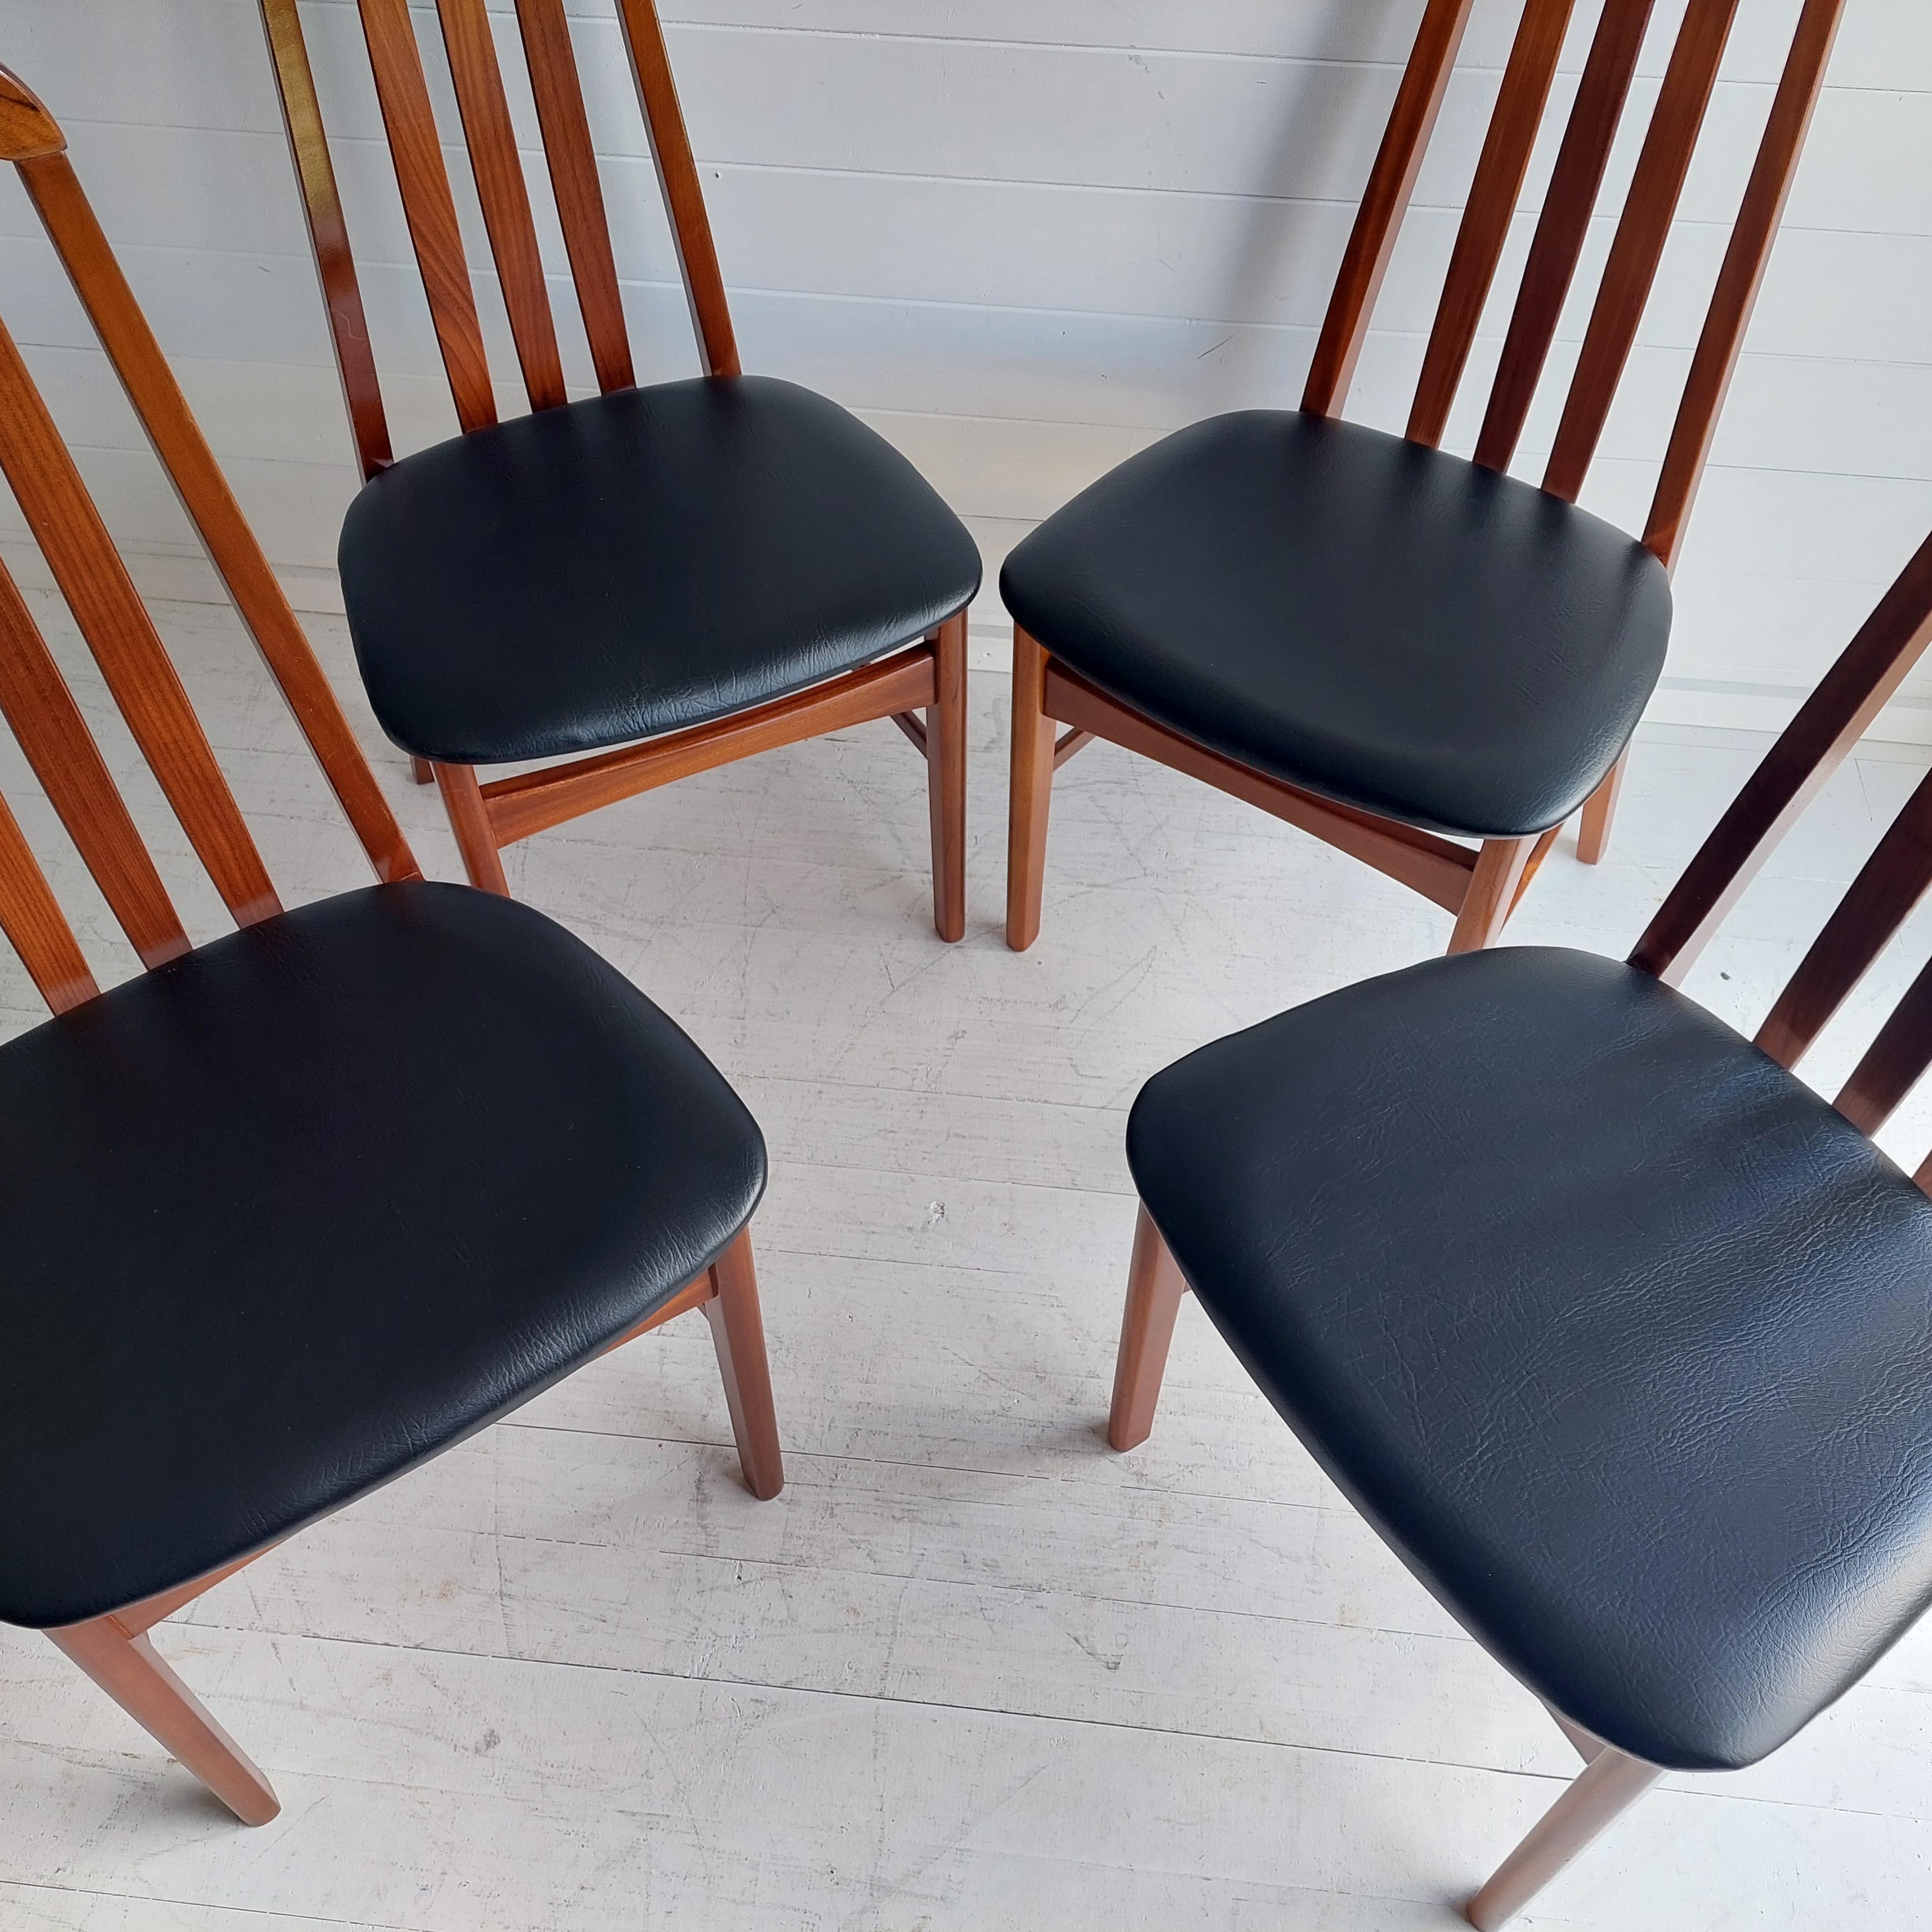 Mid-Century Modern Mid entury Teak Dining Chairs by Jentique Niels Koefoed Style, 1970s Set of 4